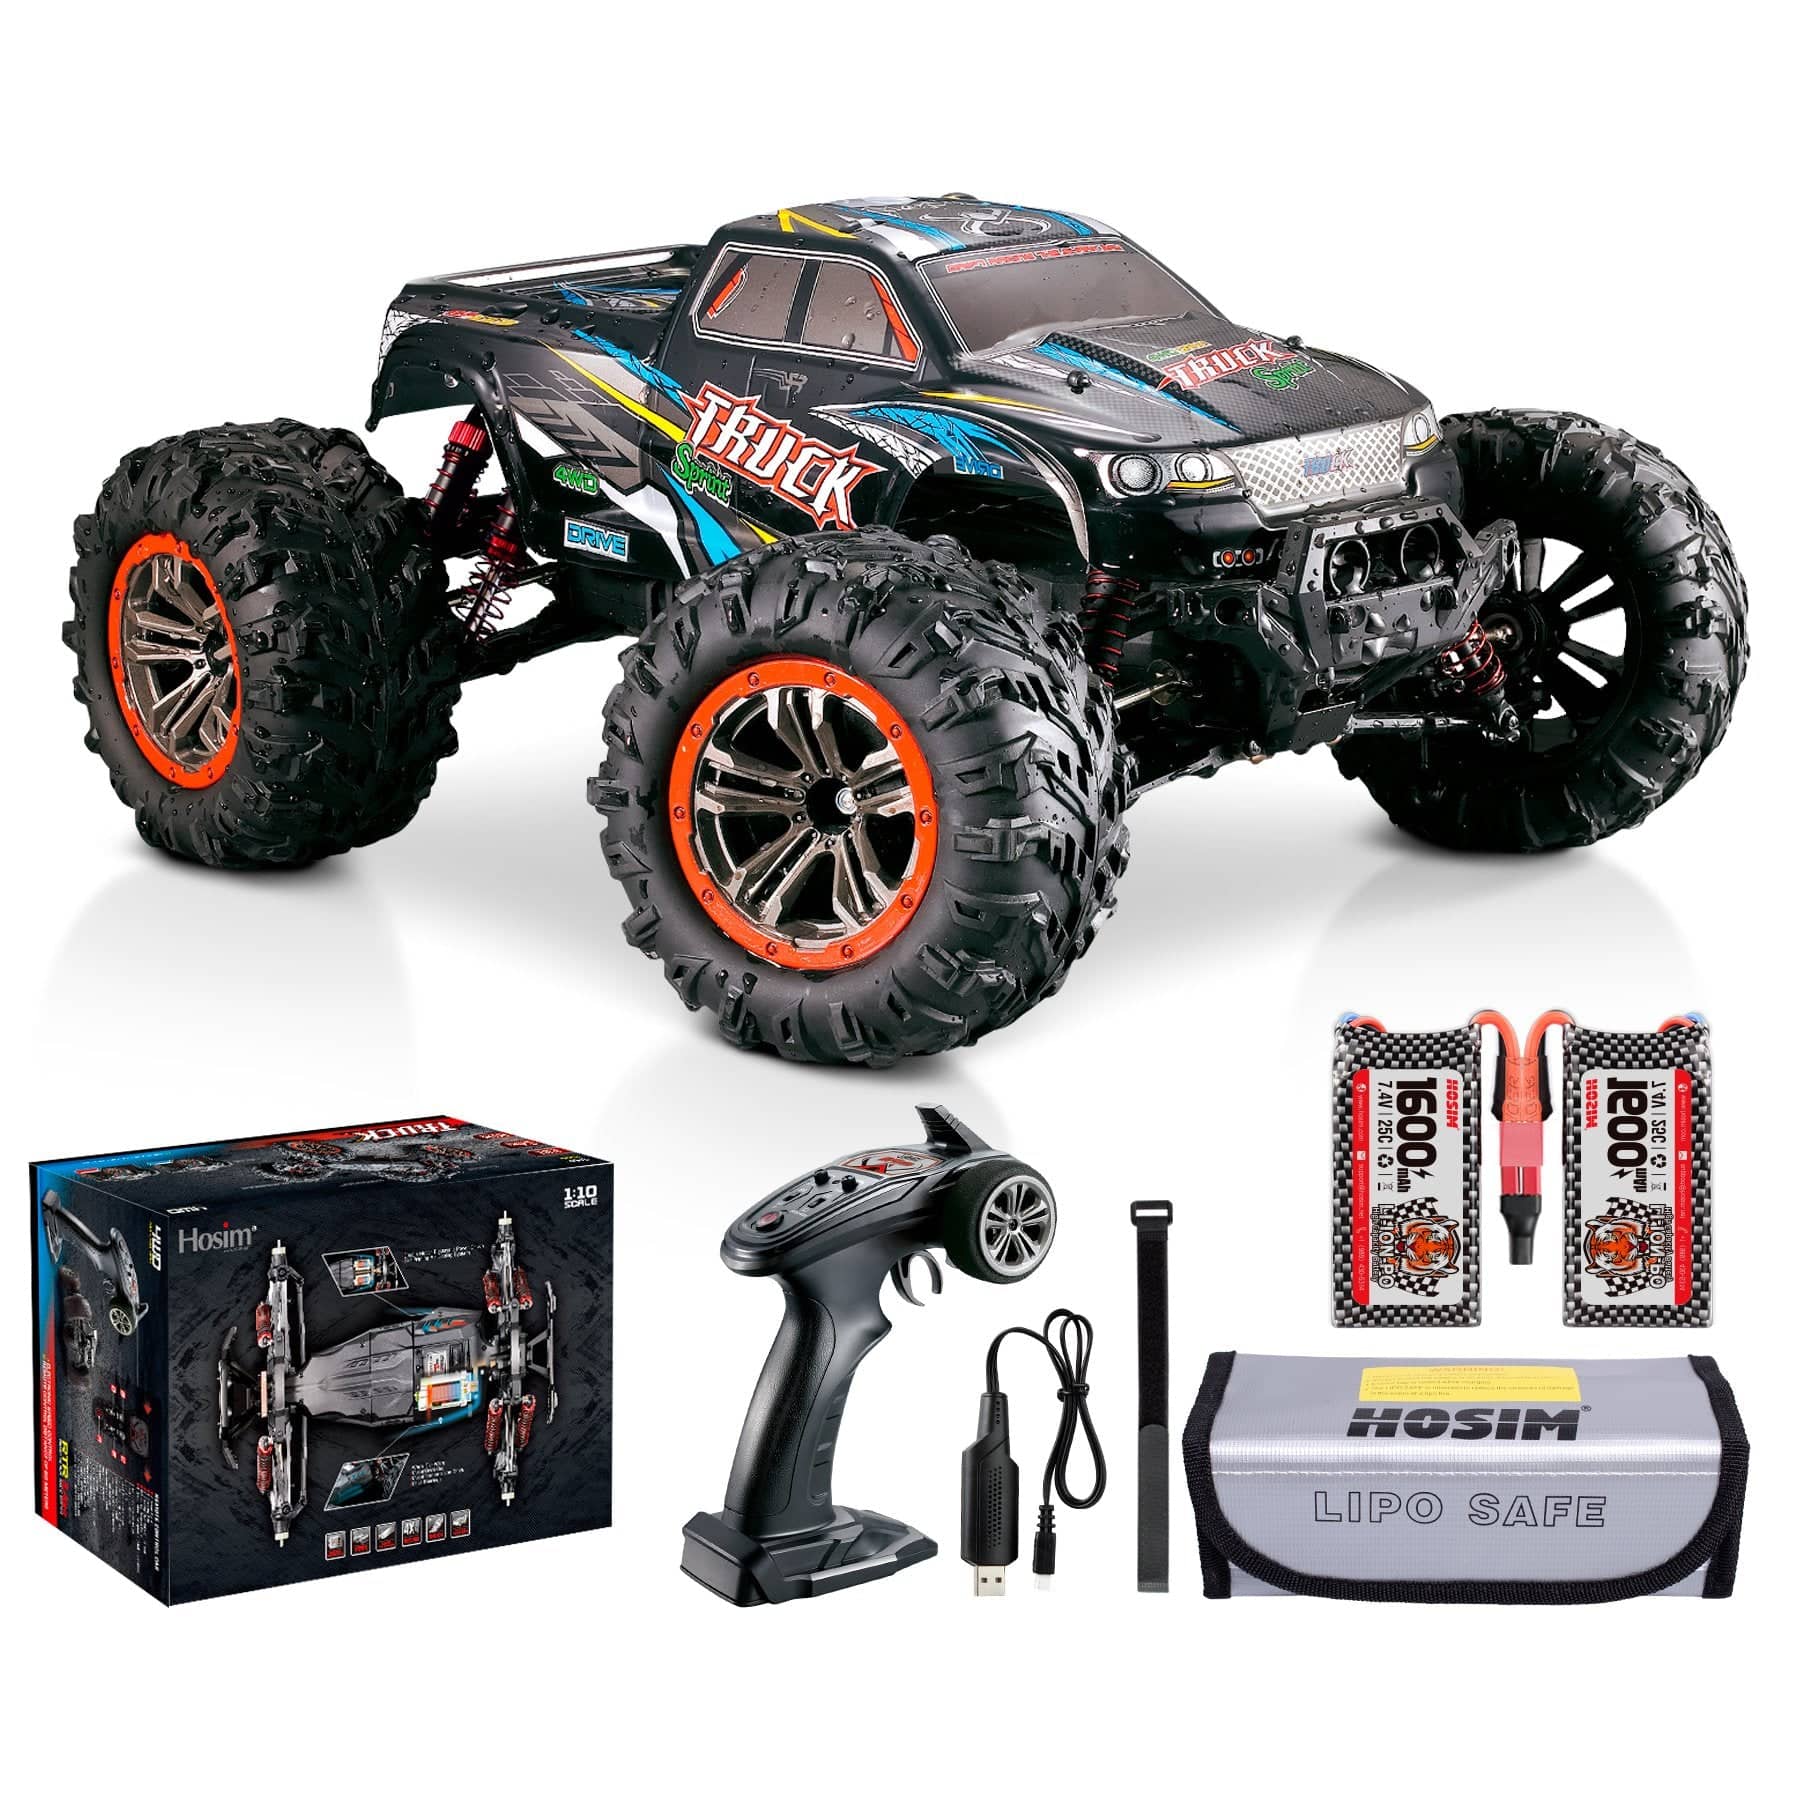 Hosim 1/10 Remote Control Car RC Car Monster Truck 9125 with 2 Batteries Blue